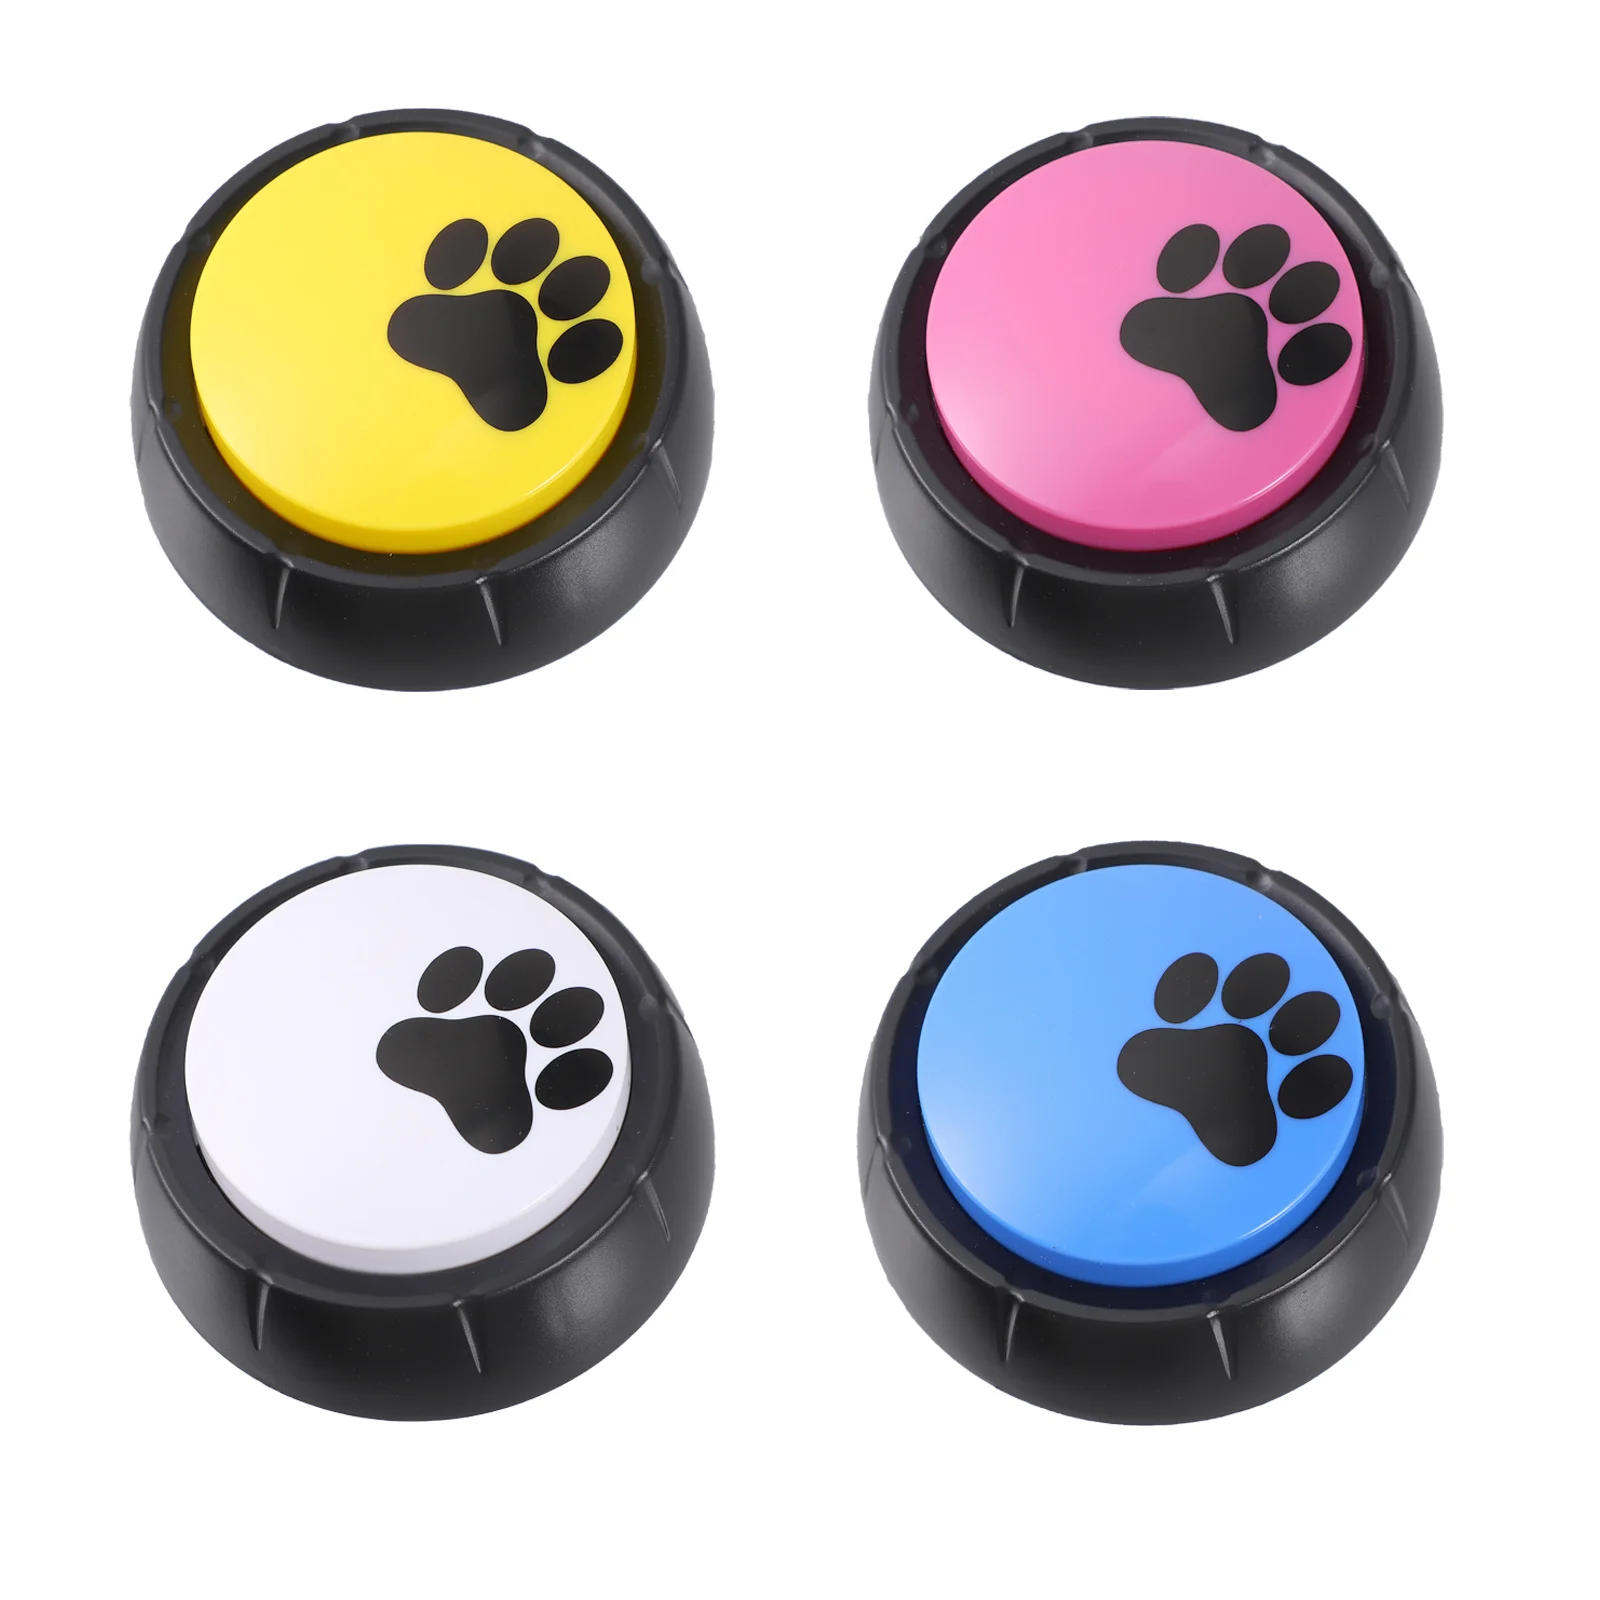 

Pets Toys Recordable Recording Button Playthings Dog Buttons Pet Talking Record Lovely Buzzer Buzzers Training Sound Useful Mini